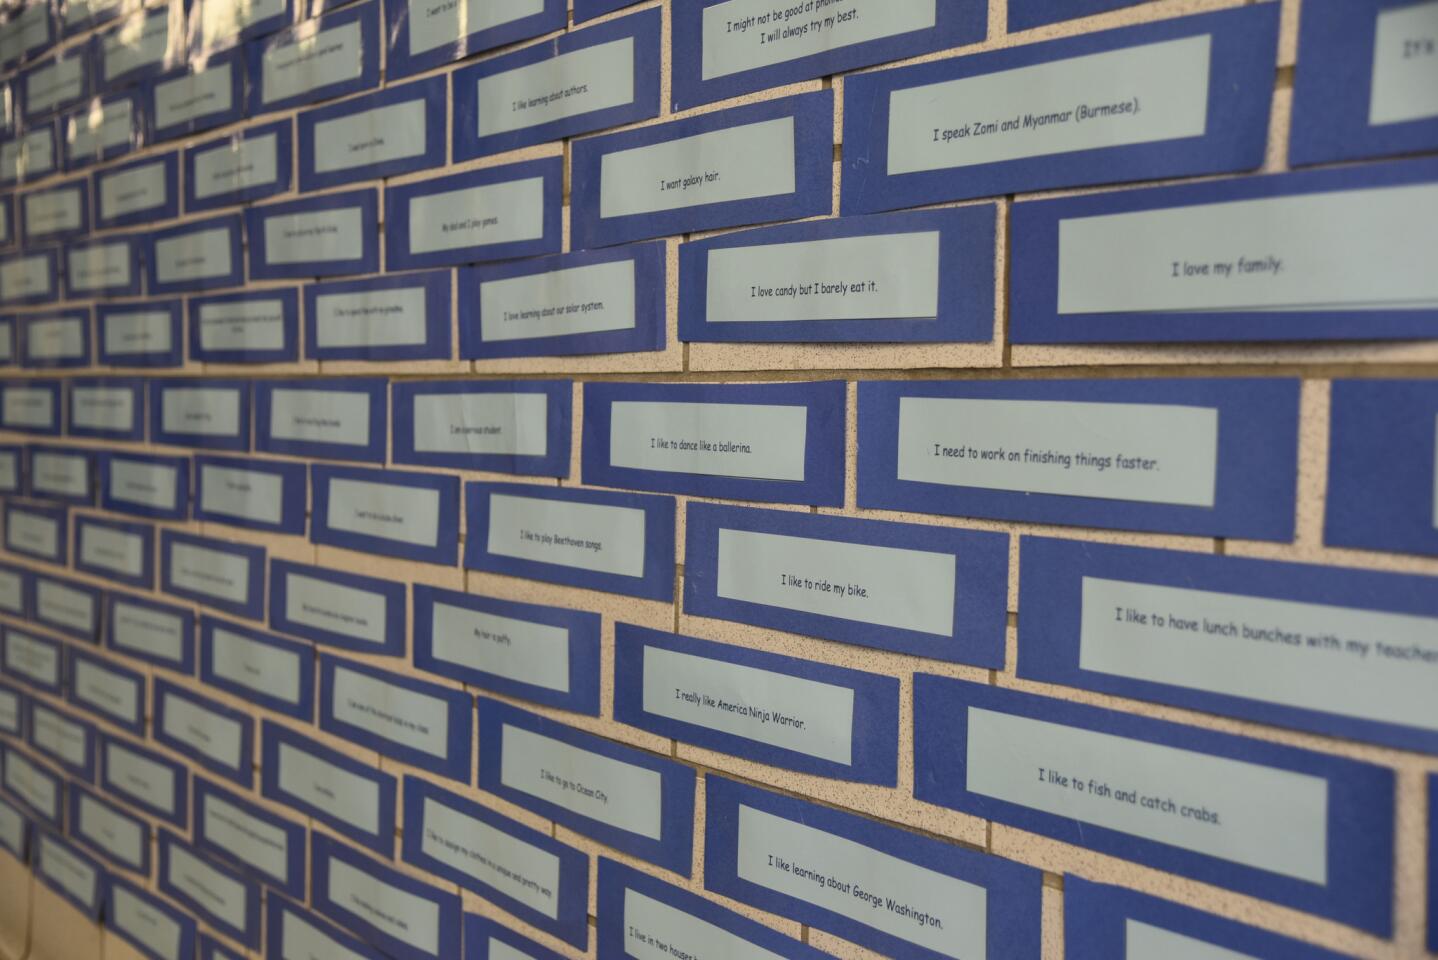 A wall at Hillcrest Elementary School shows what incoming students said they want their new teachers to know about them before the school year starts.